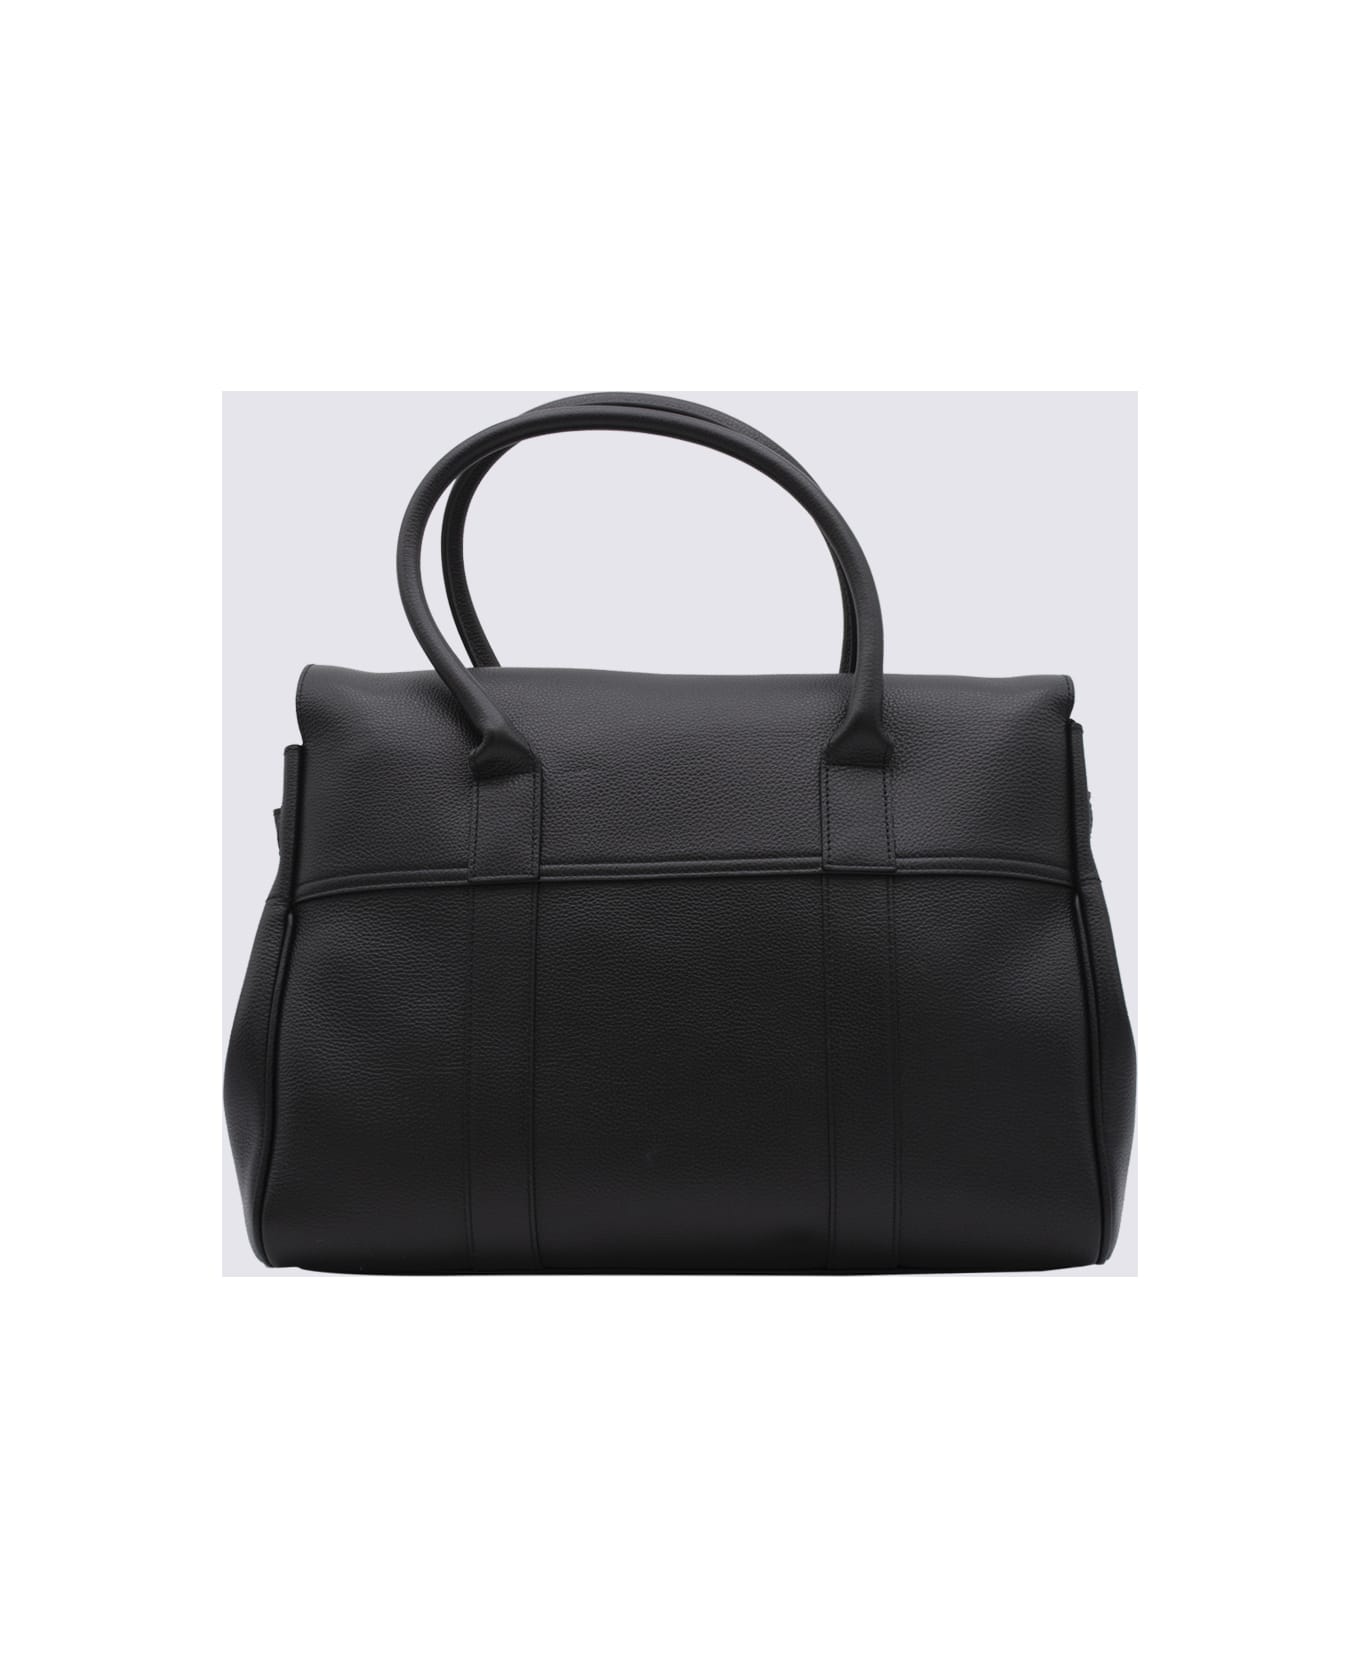 Mulberry Black Leather Bayswater Tote Bag - Black-Brass